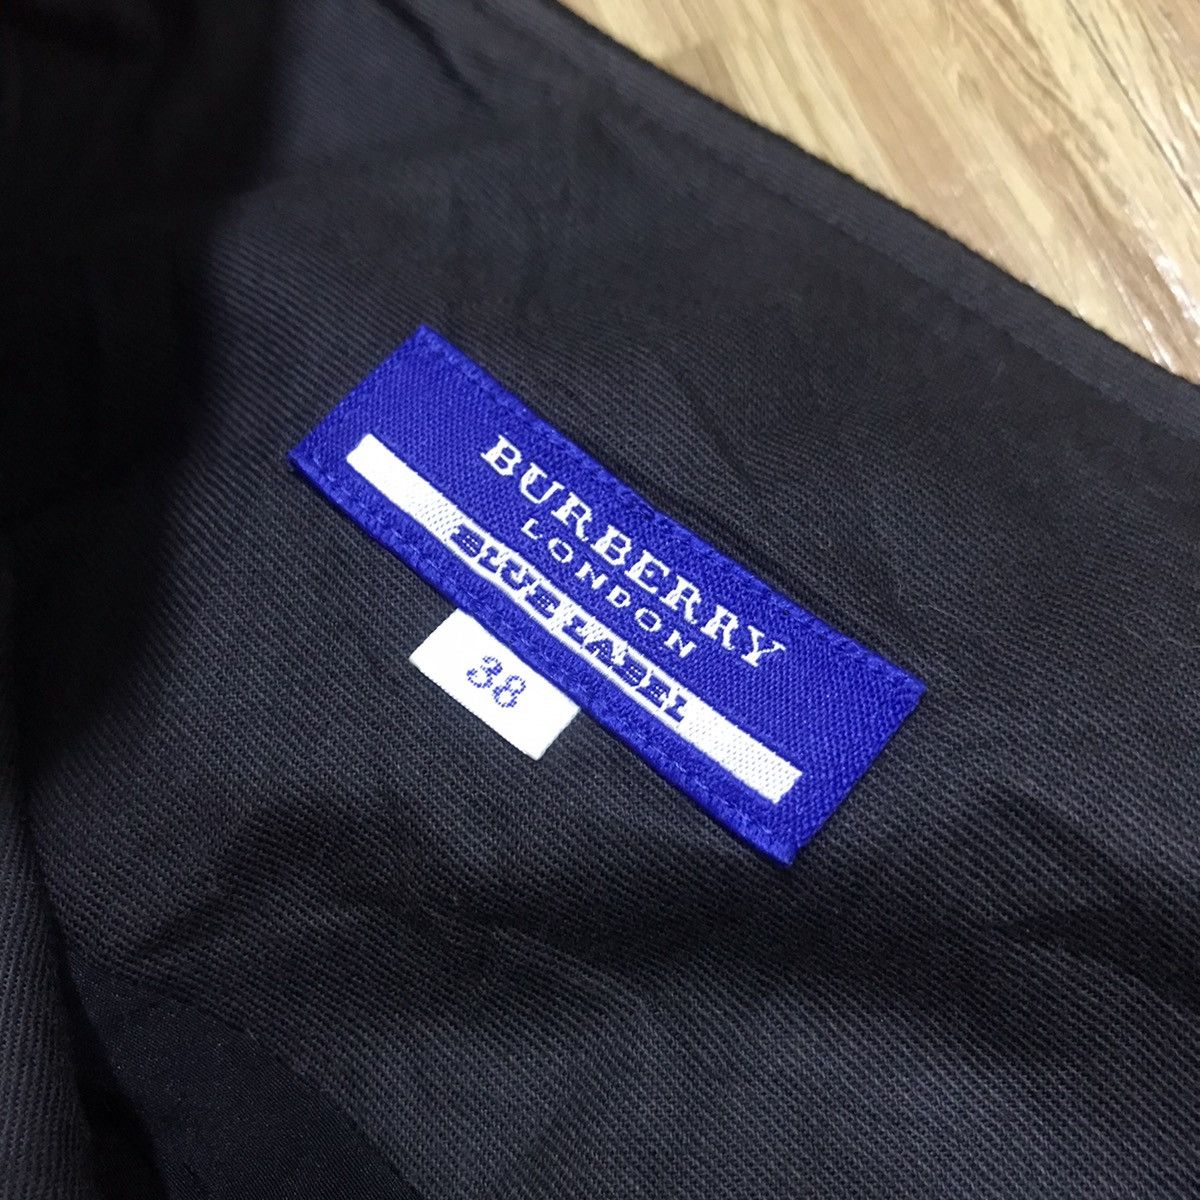 Burberry blue label small embroidery logo black wool skirt - 2